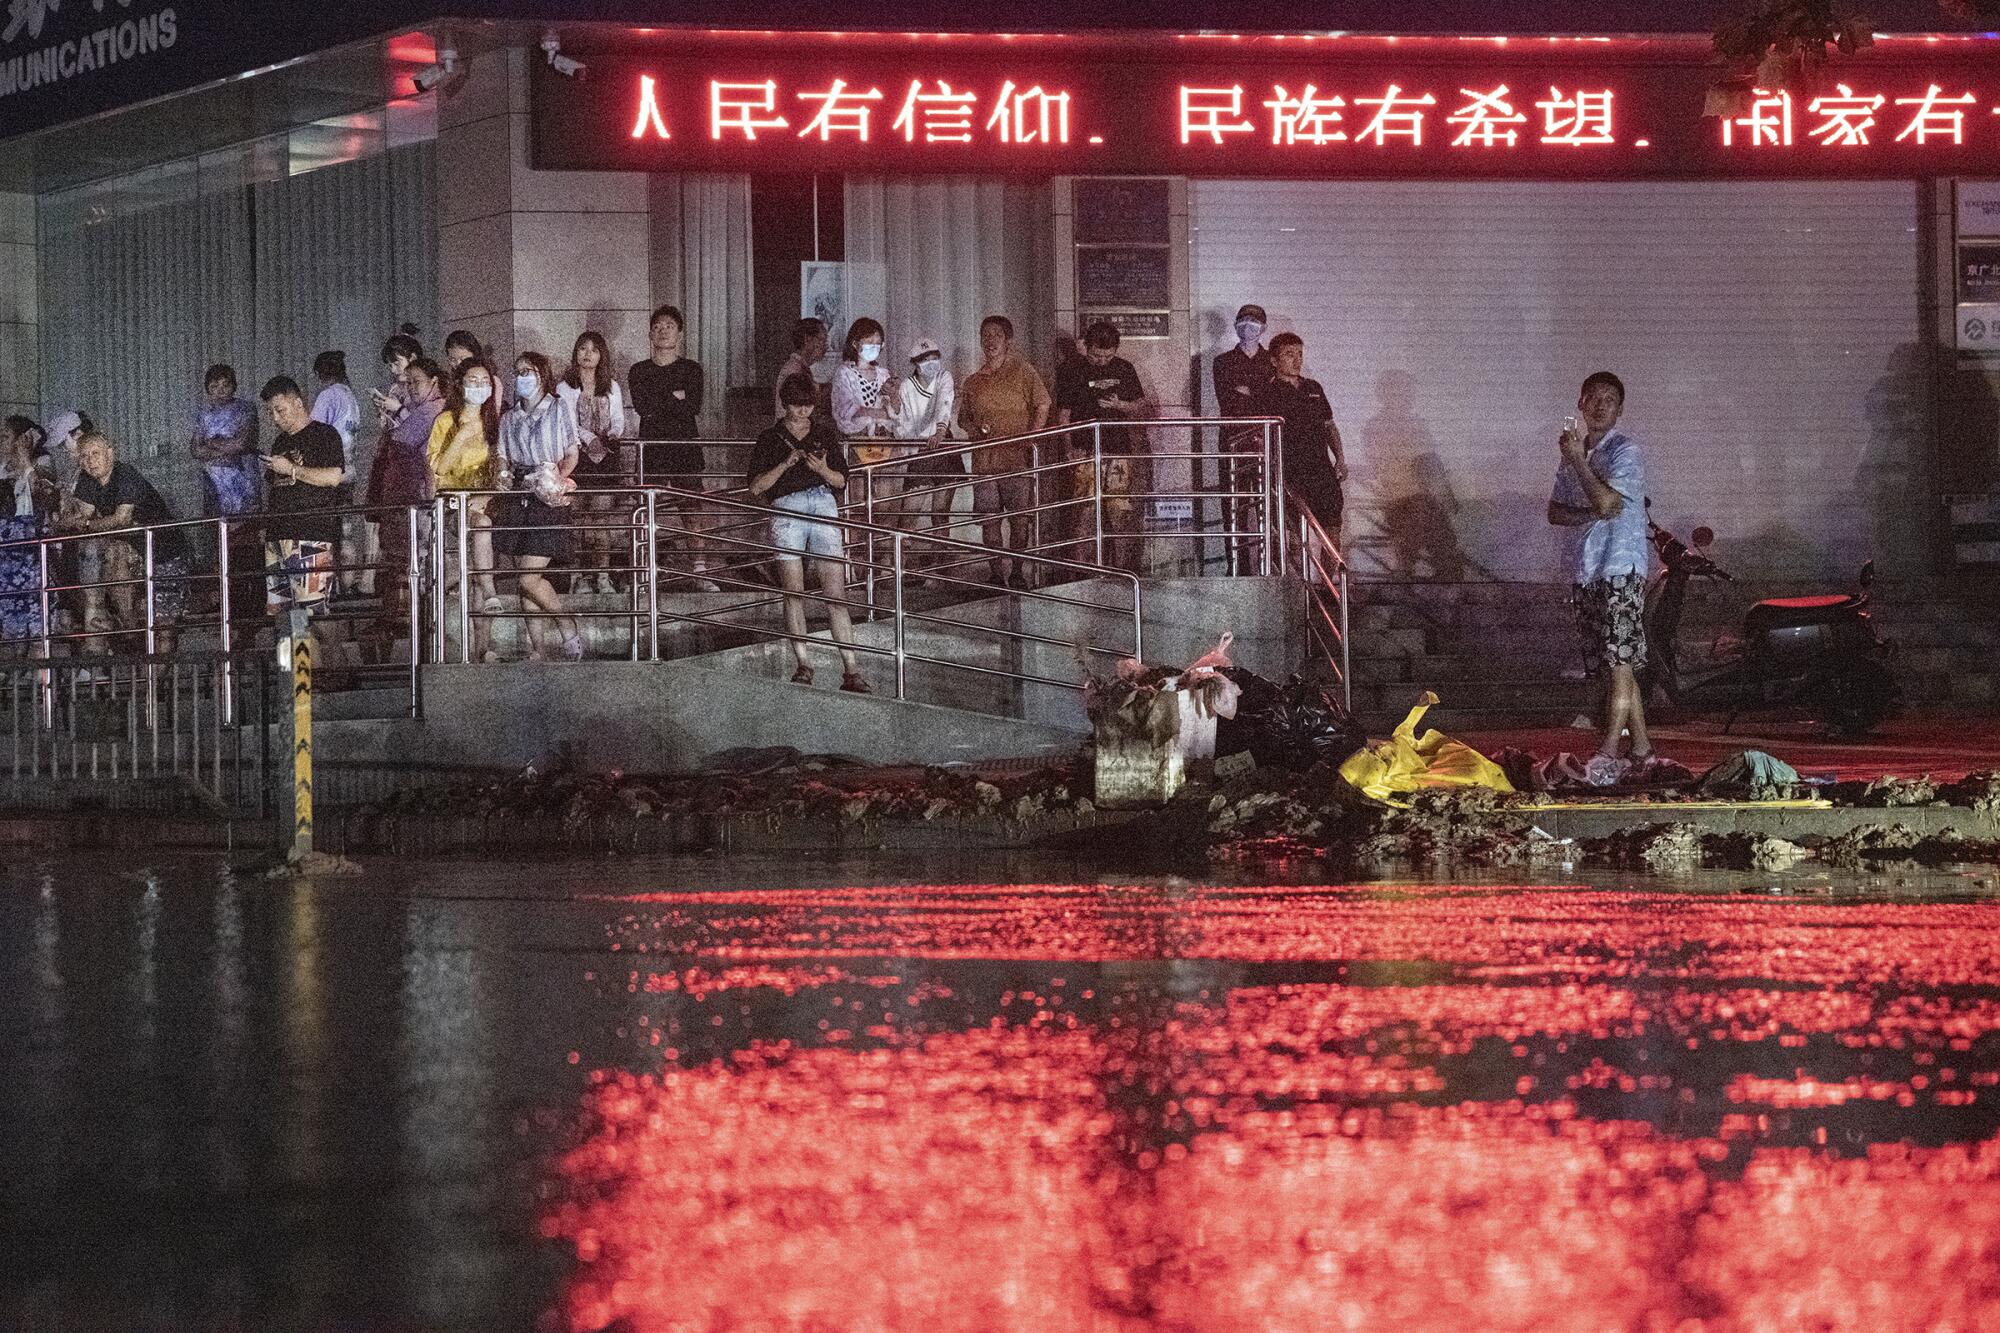 People gather outside a building under a neon sign with Chinese characters 